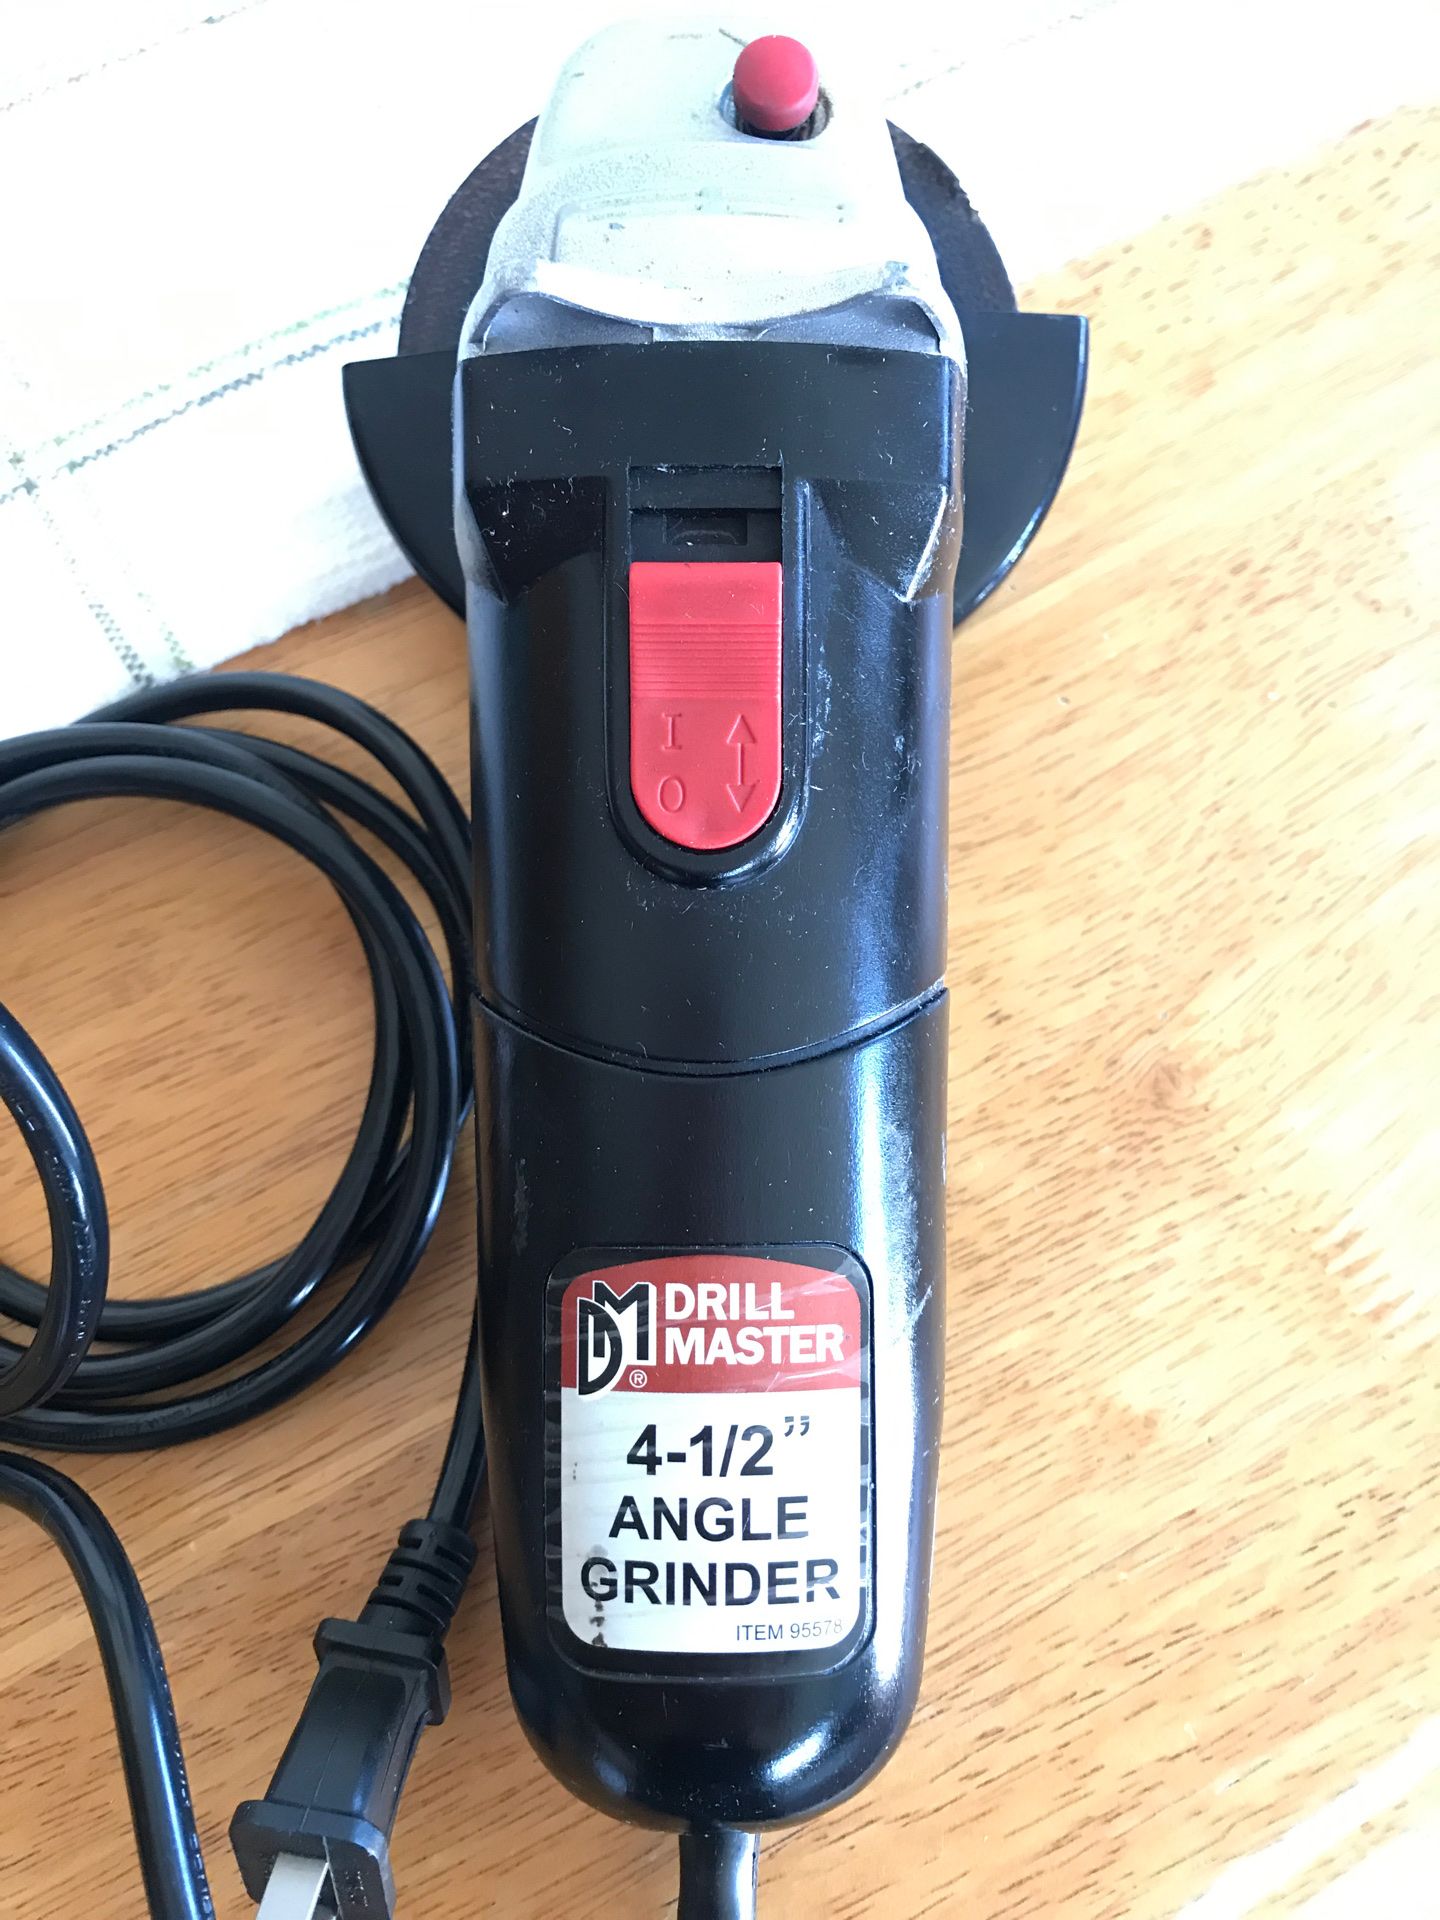 Drill master 4-1/2 angle grinder